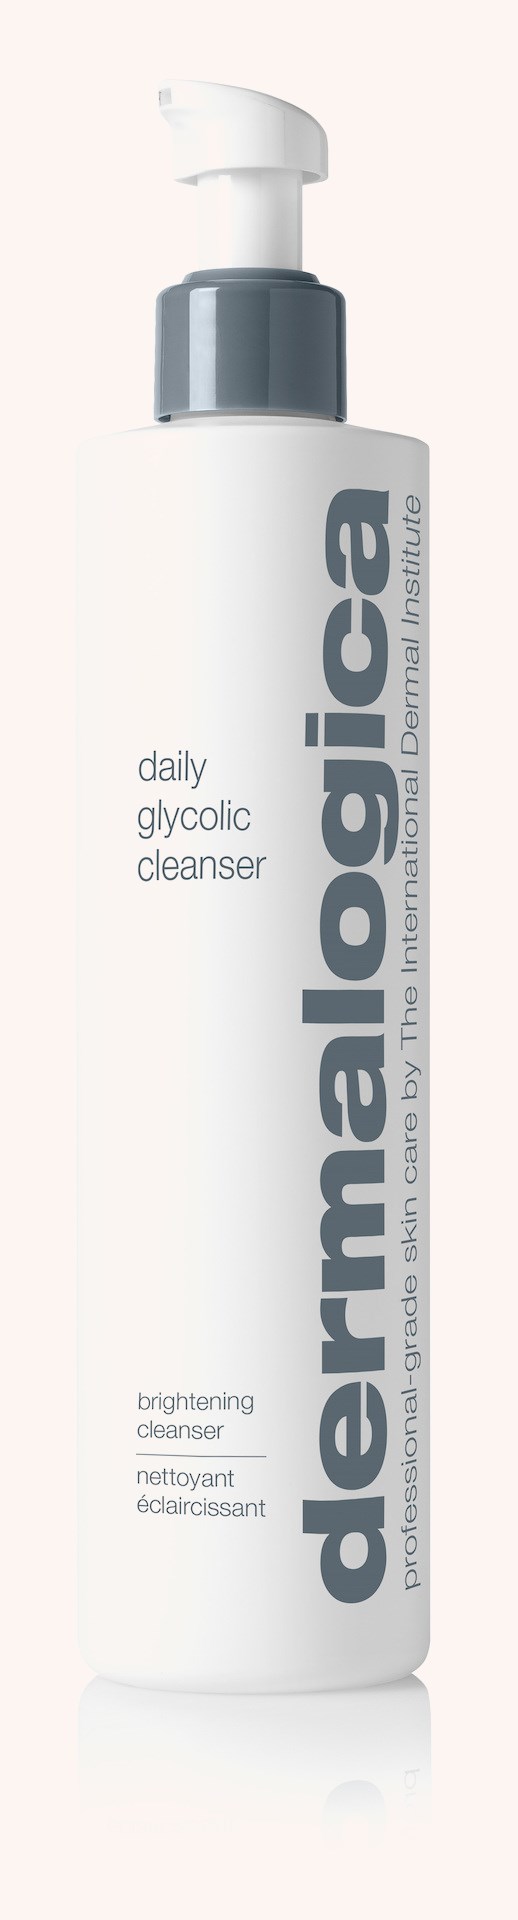 Daily Glycolic Cleanser 295 ml